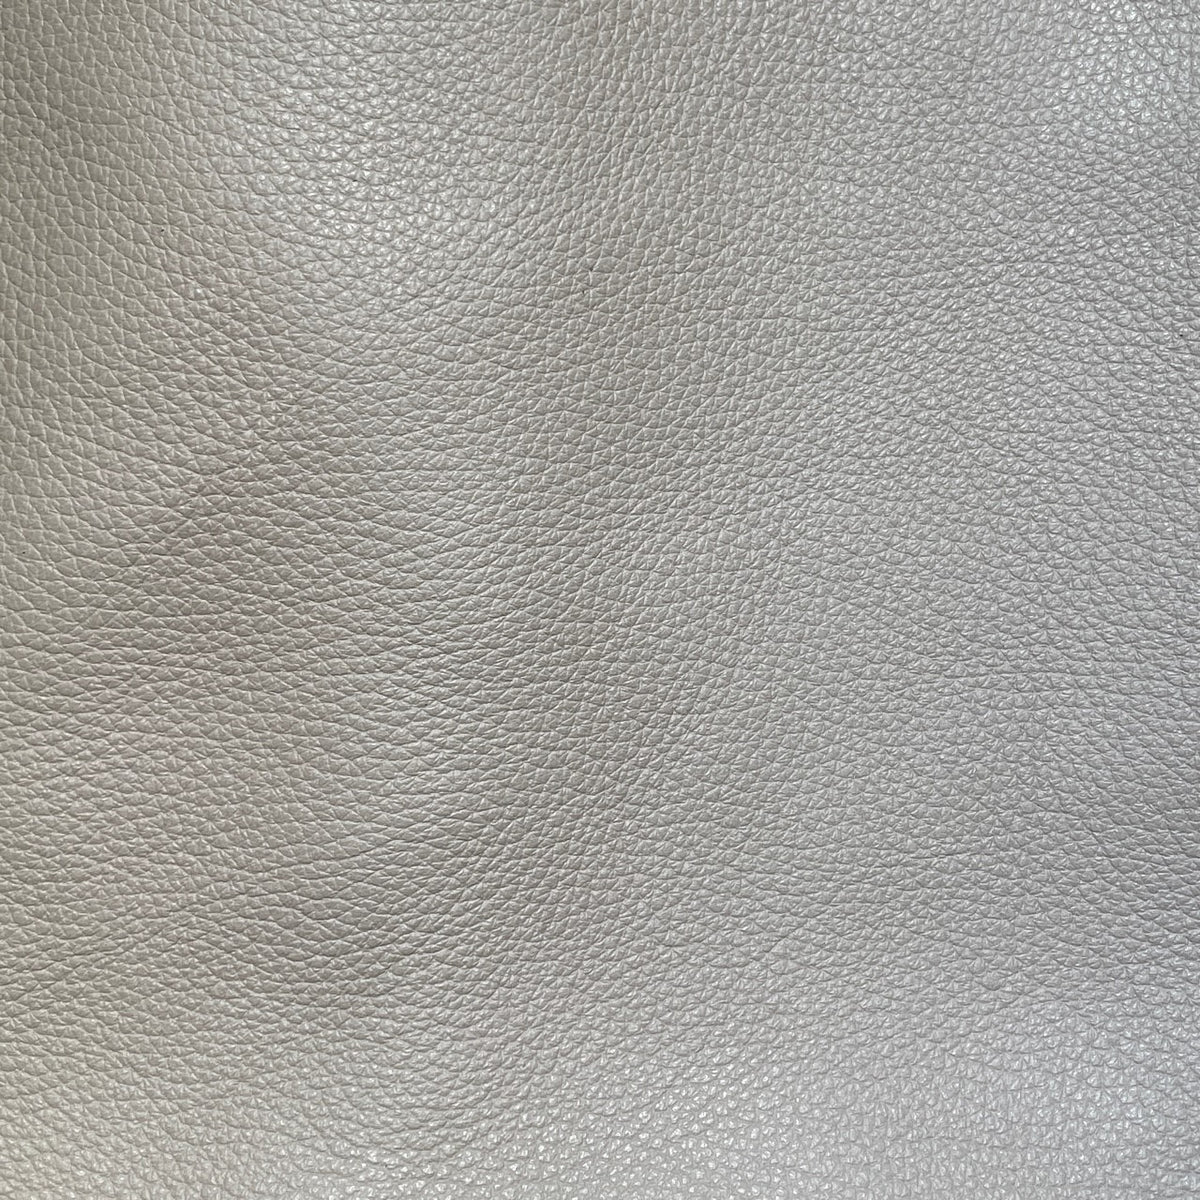 Upholstery Cow Hide #25 | Beige | 1.8 mm | 45 sq.ft | From $375 ea.